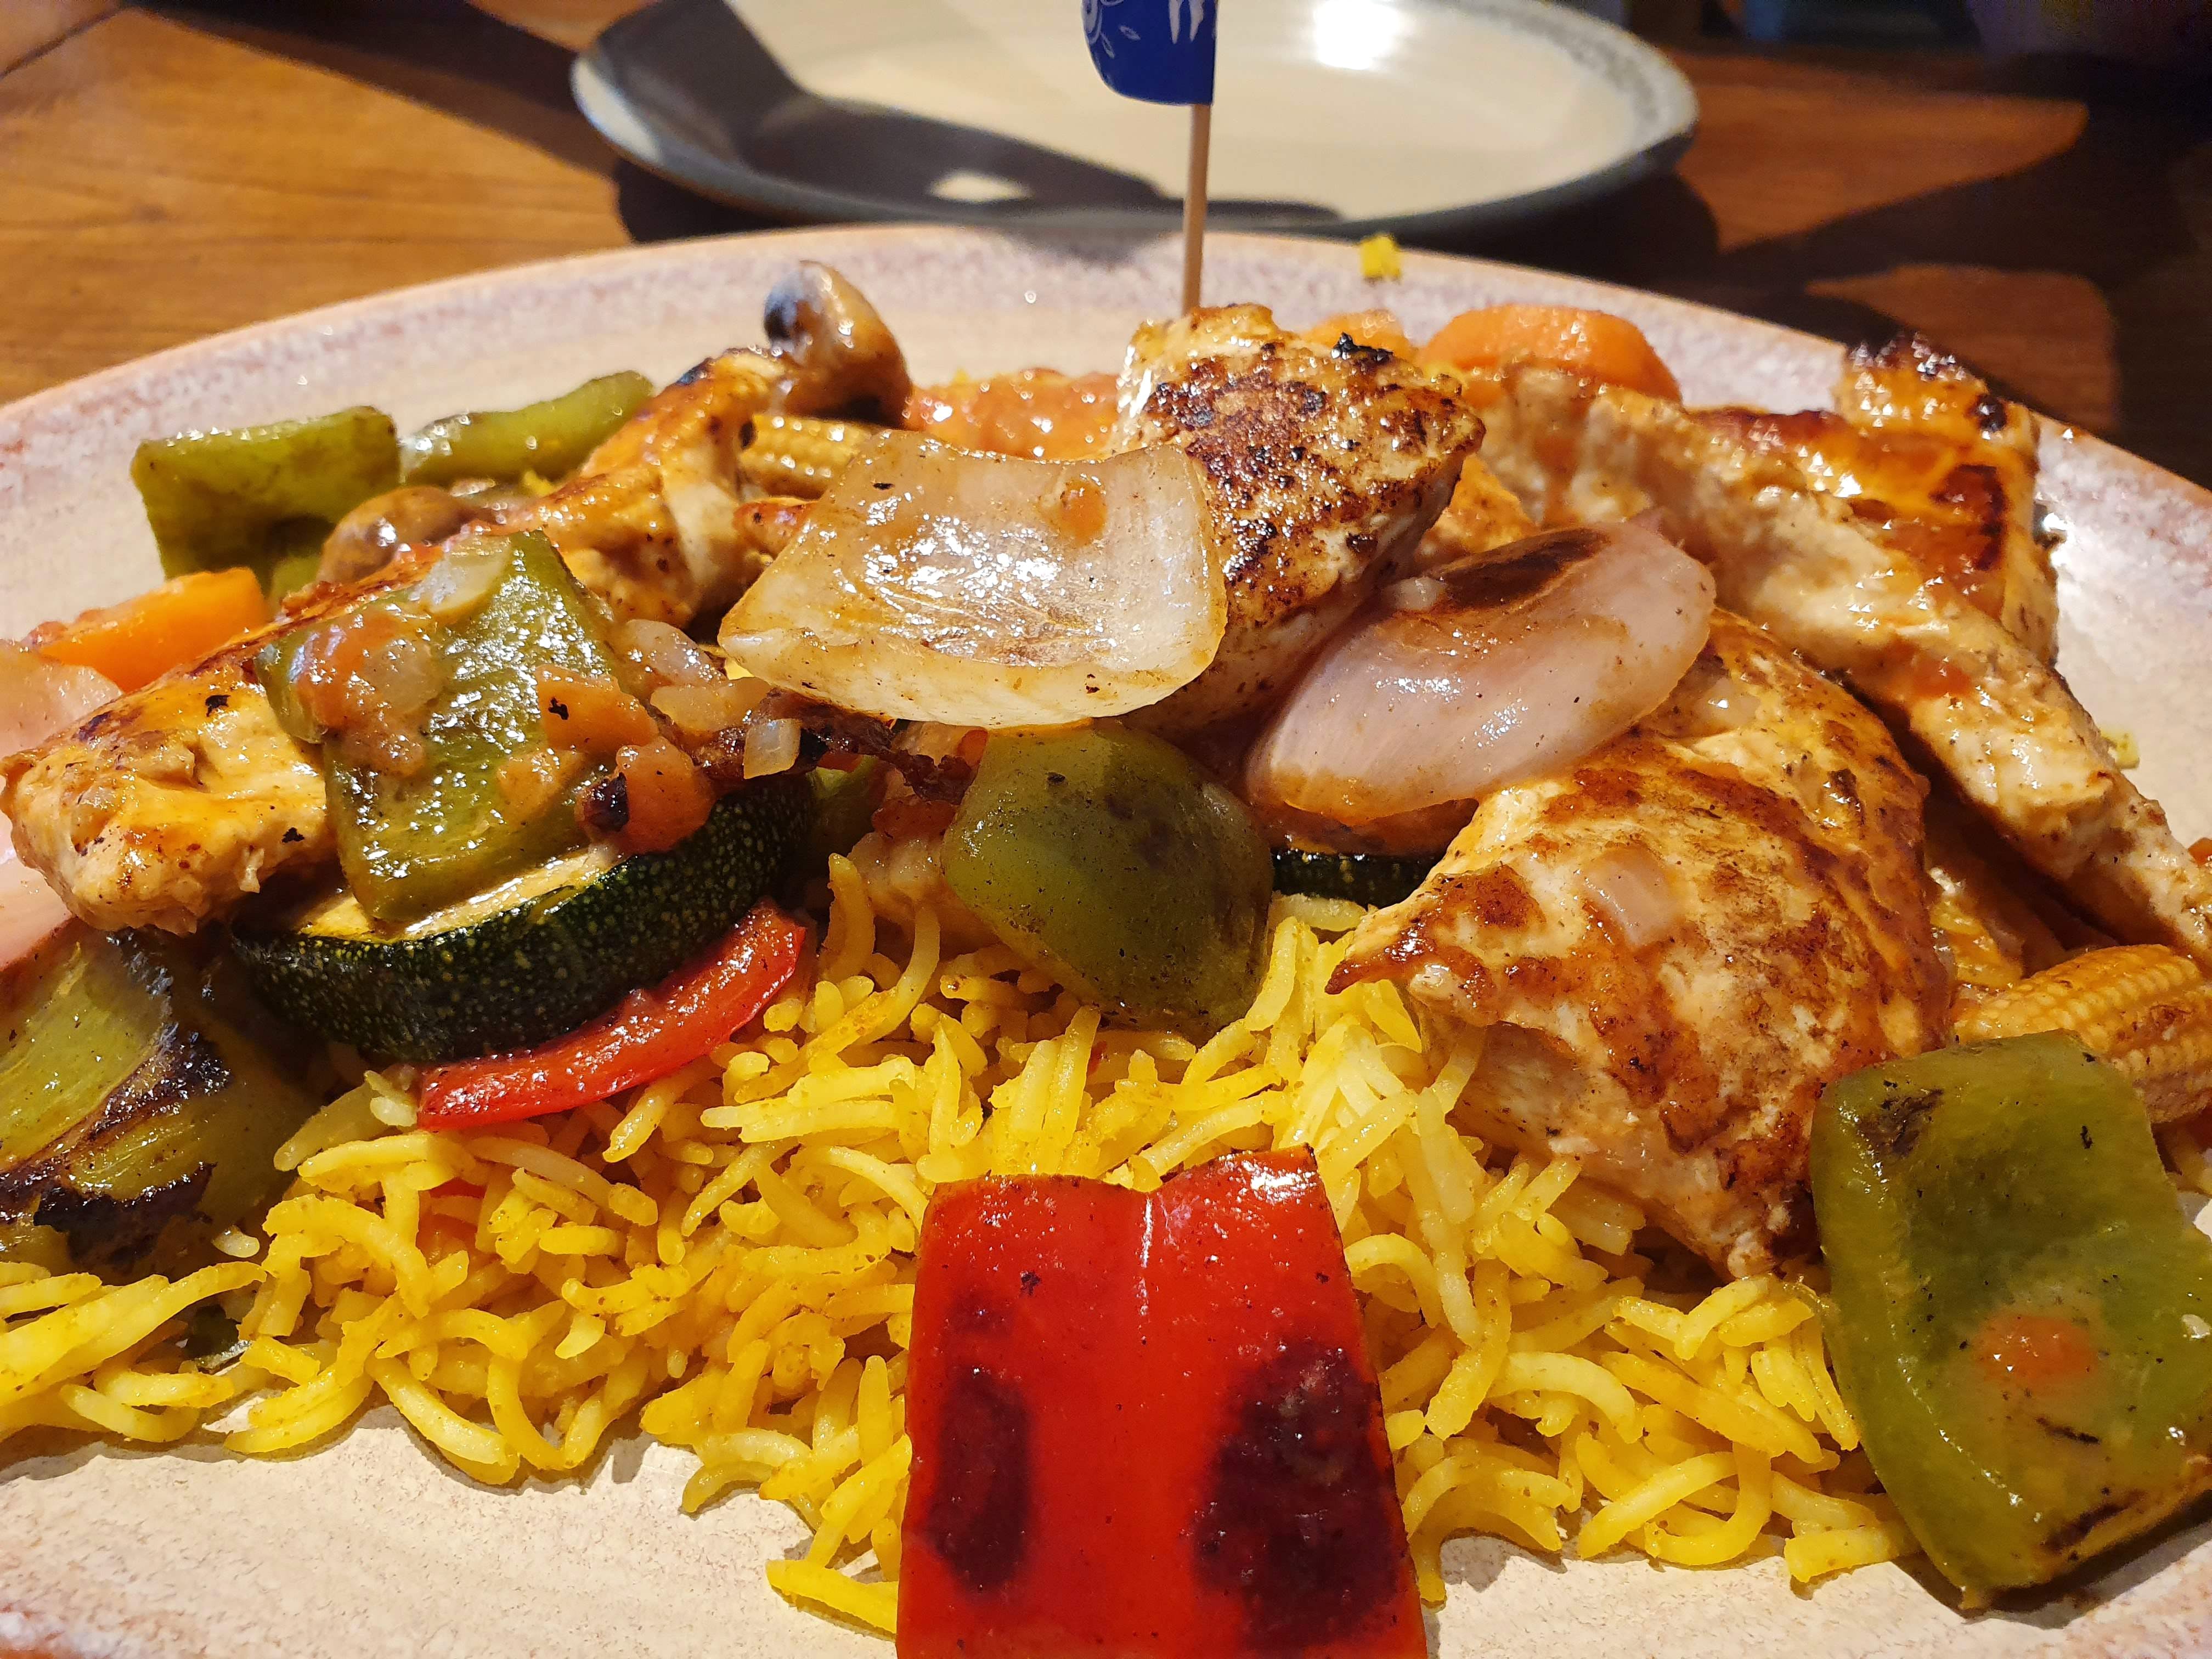 Dish,Food,Cuisine,Ingredient,Meat,Produce,Staple food,Kabsa,Chinese food,Side dish